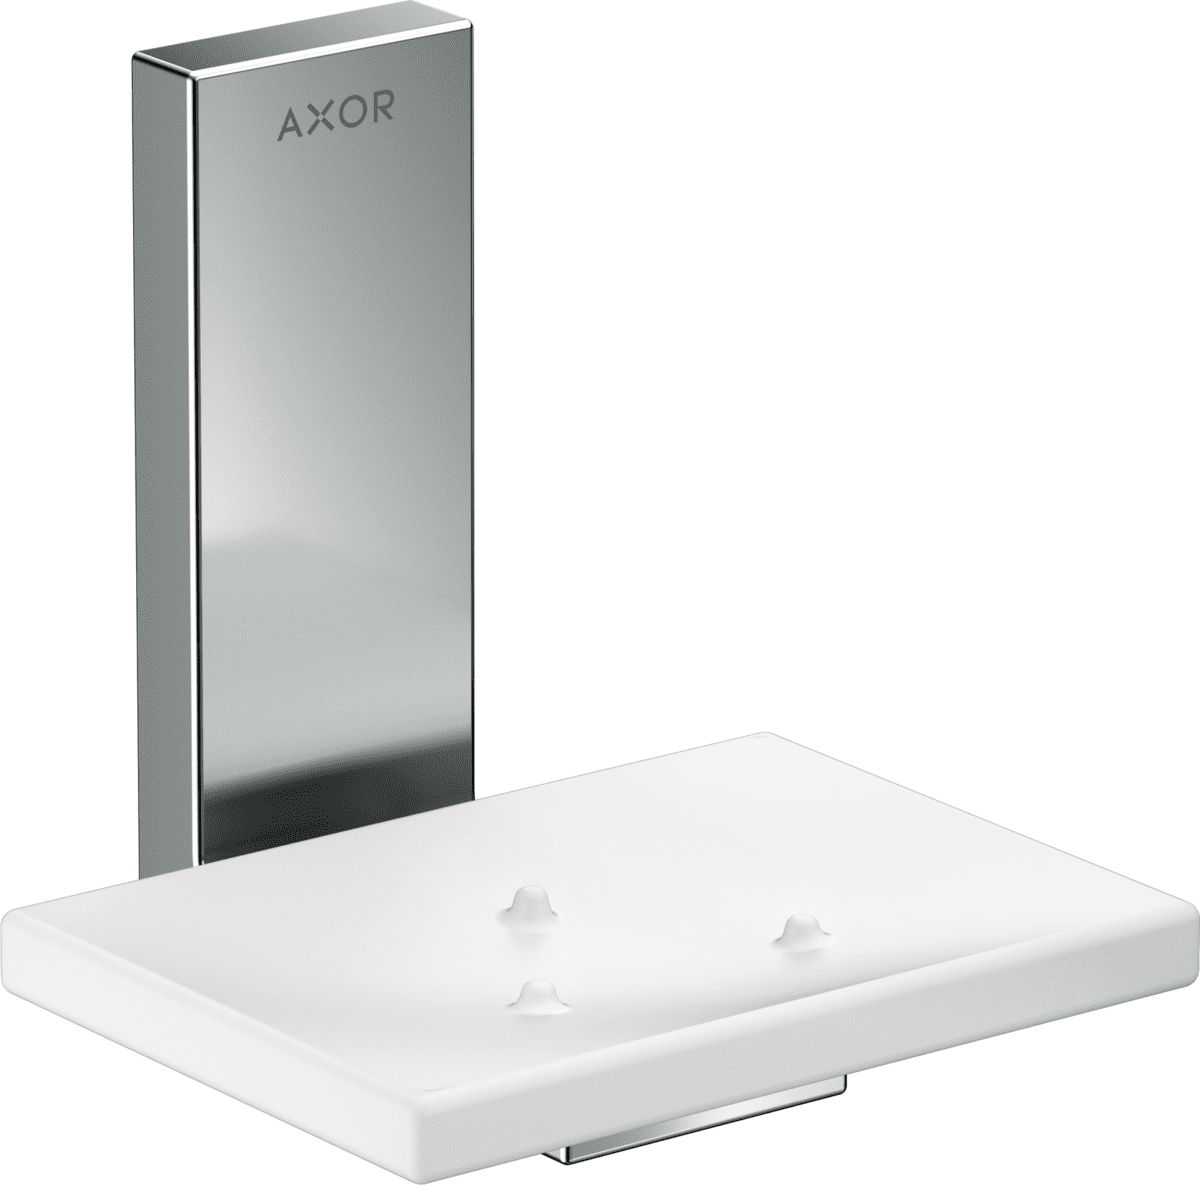 Picture of HANSGROHE AXOR Universal Rectangular Soap dish #42605000 - Chrome